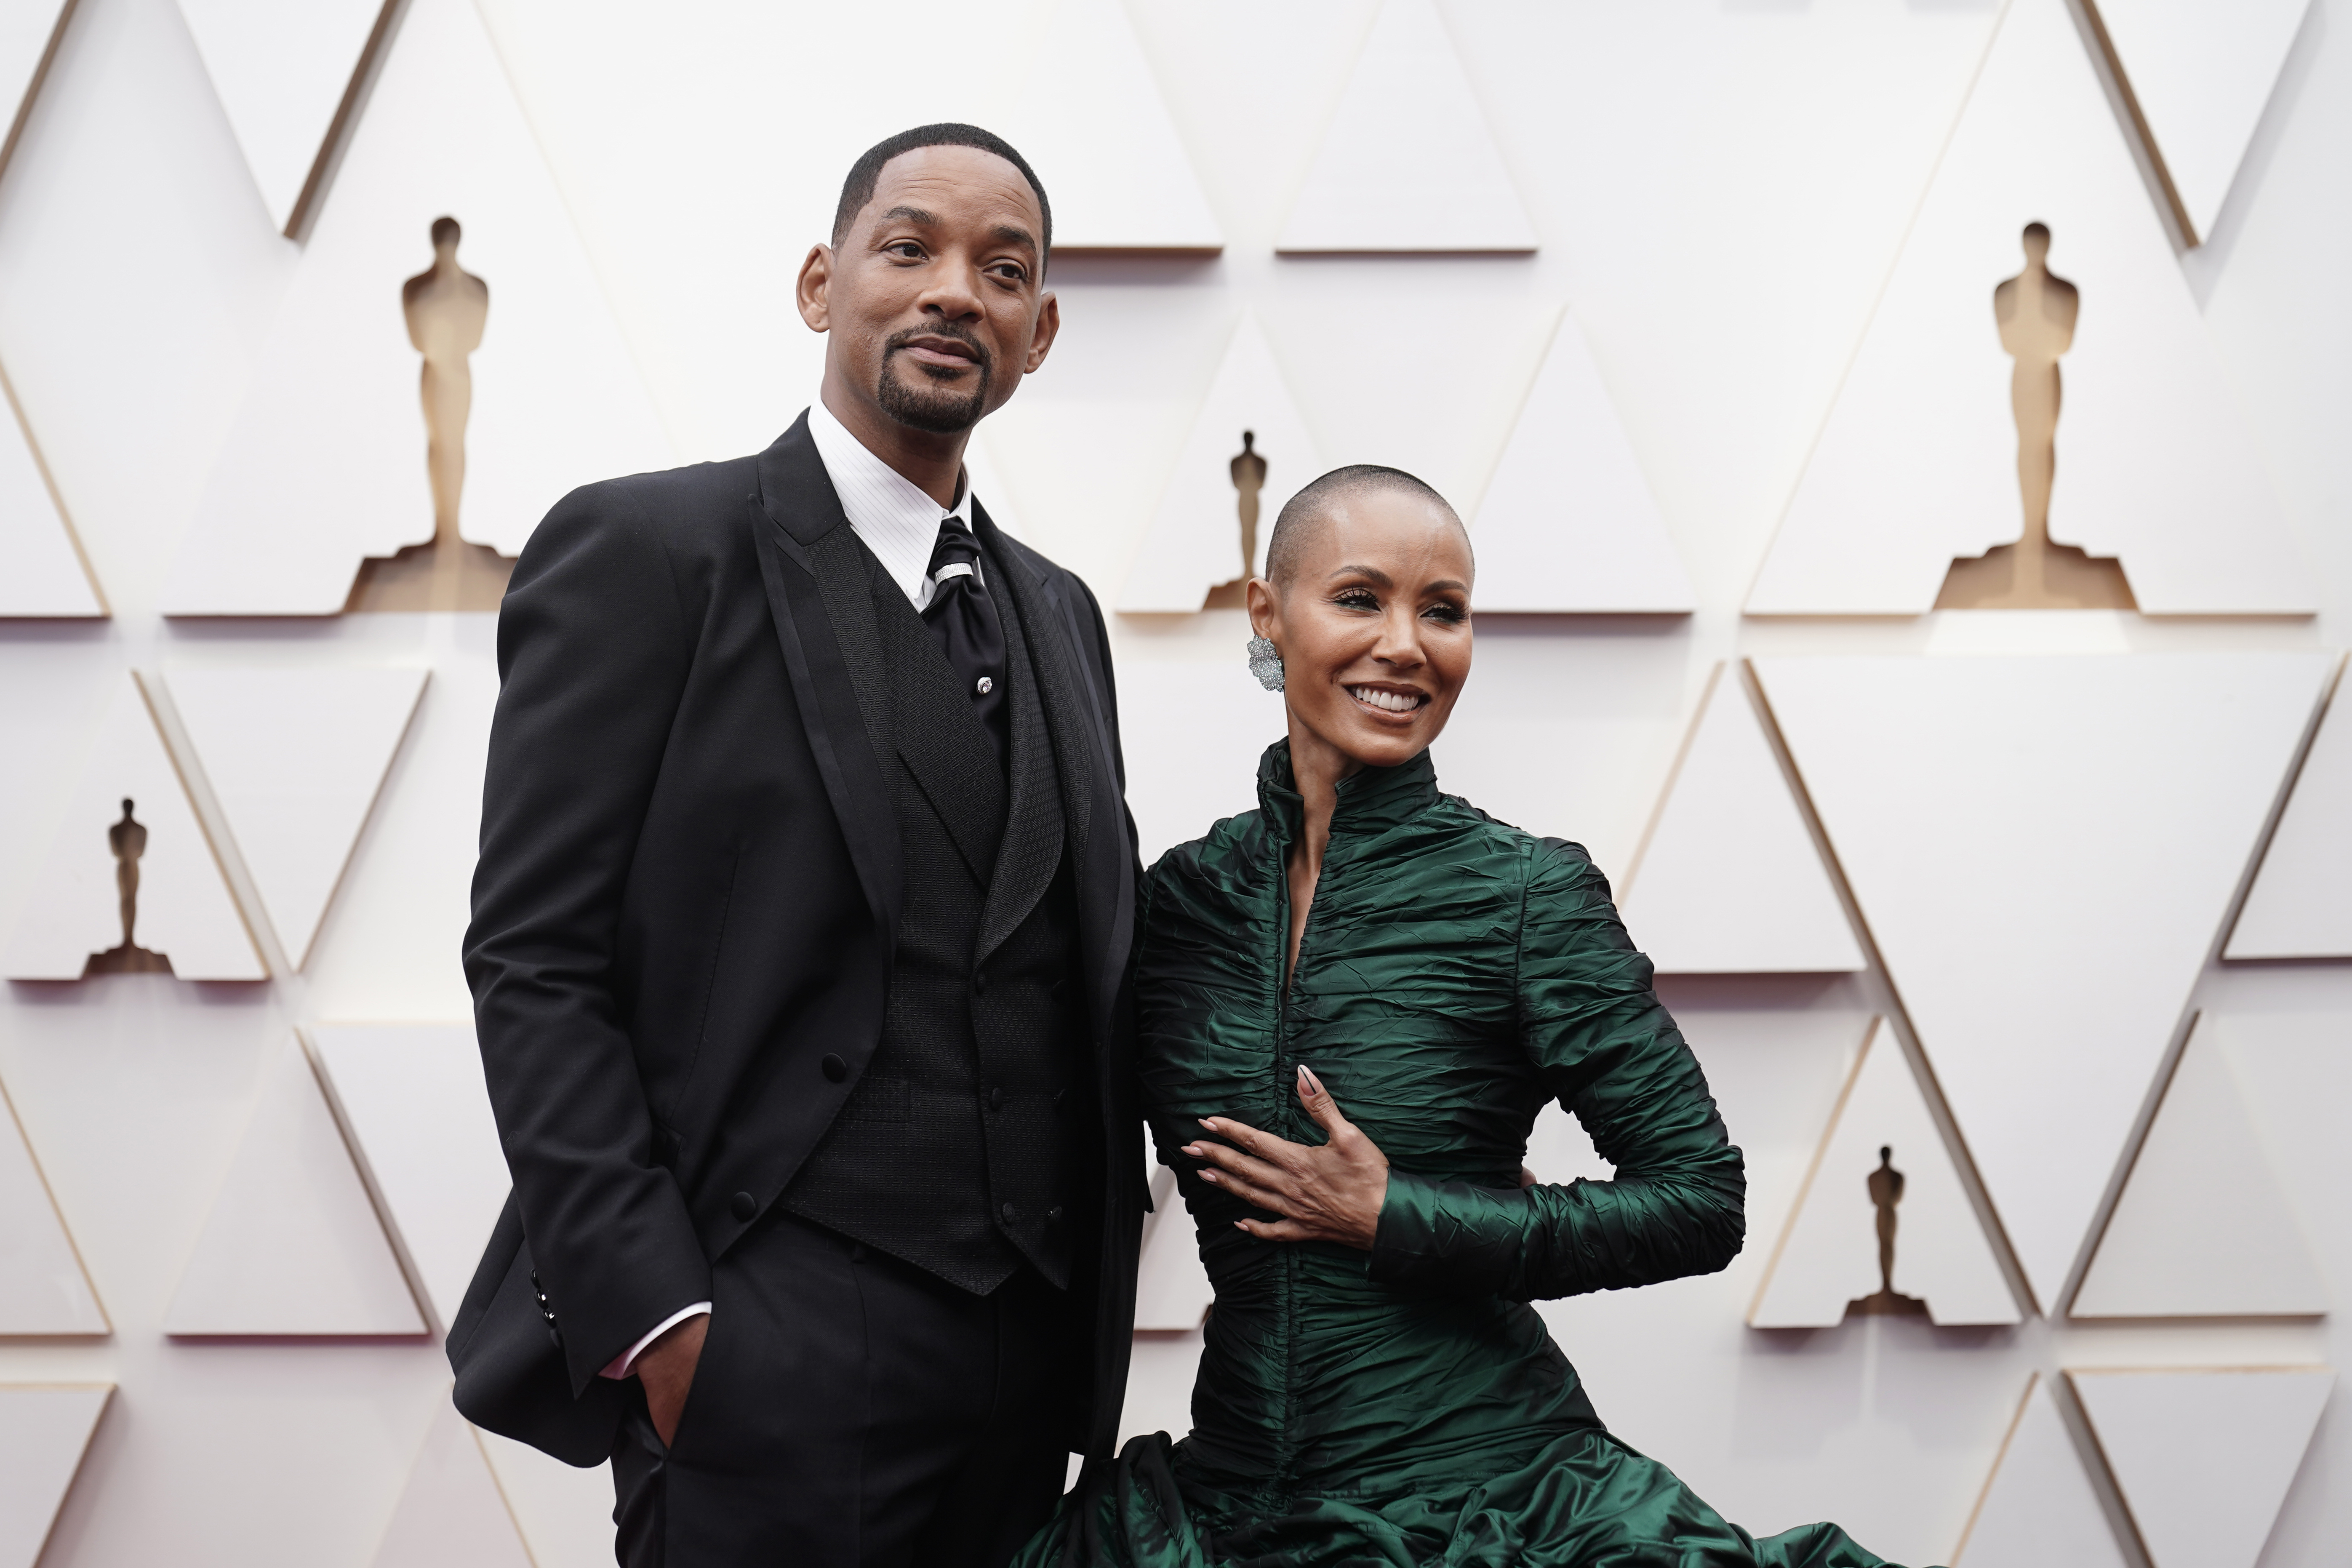 Meet Will Smith! - Meet and Greet Experience with Los Angeles